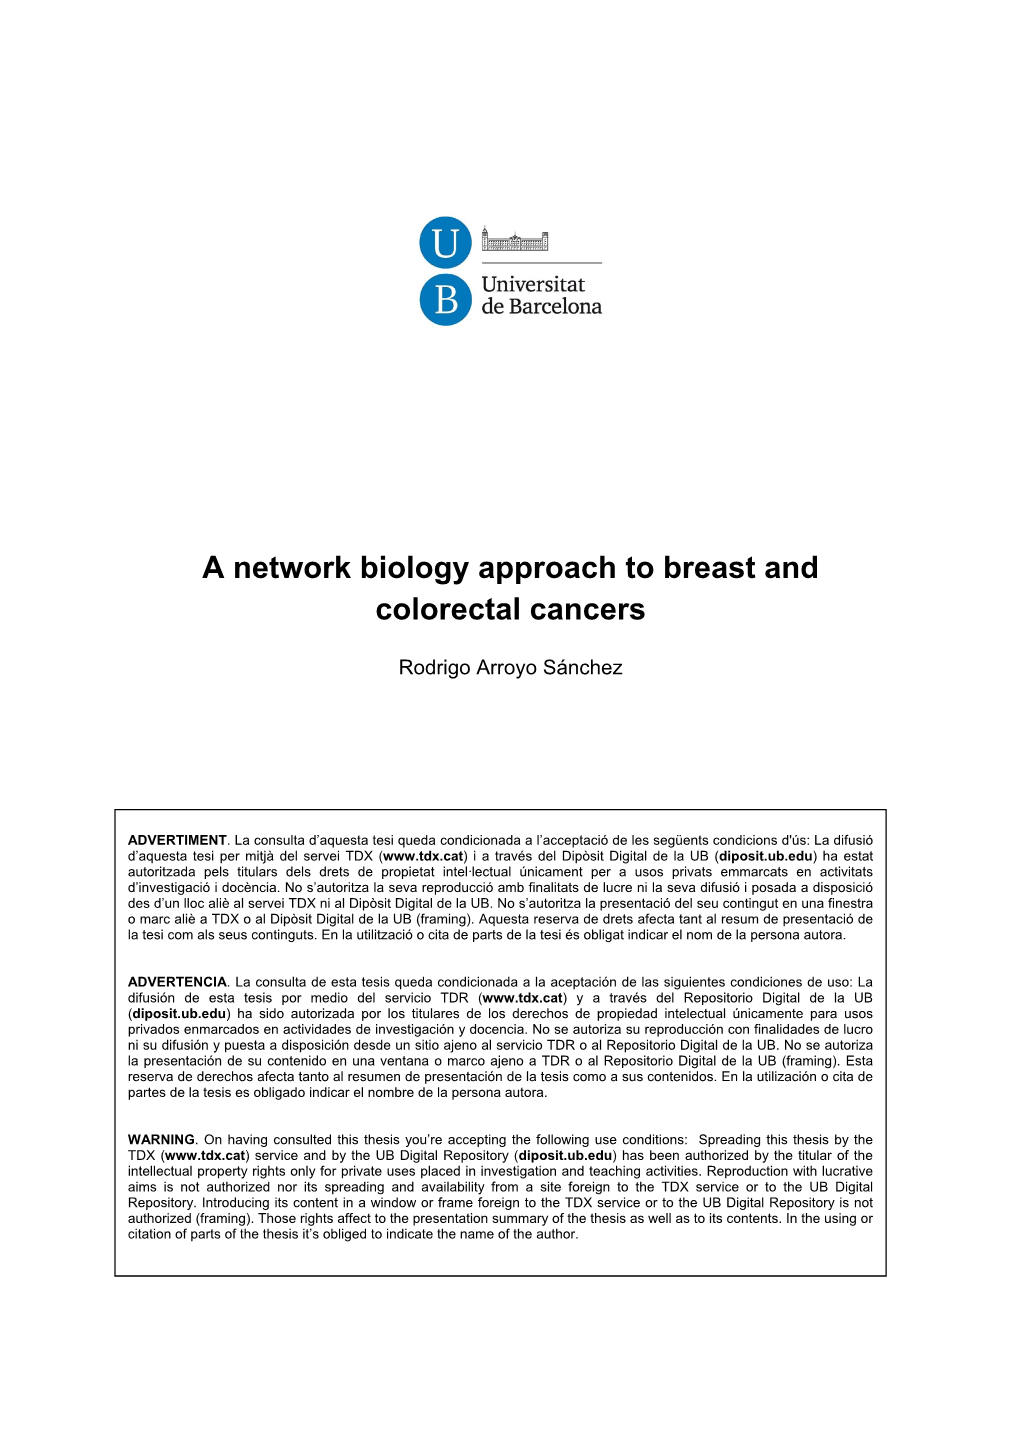 A Network Biology Approach to Breast and Colorectal Cancers